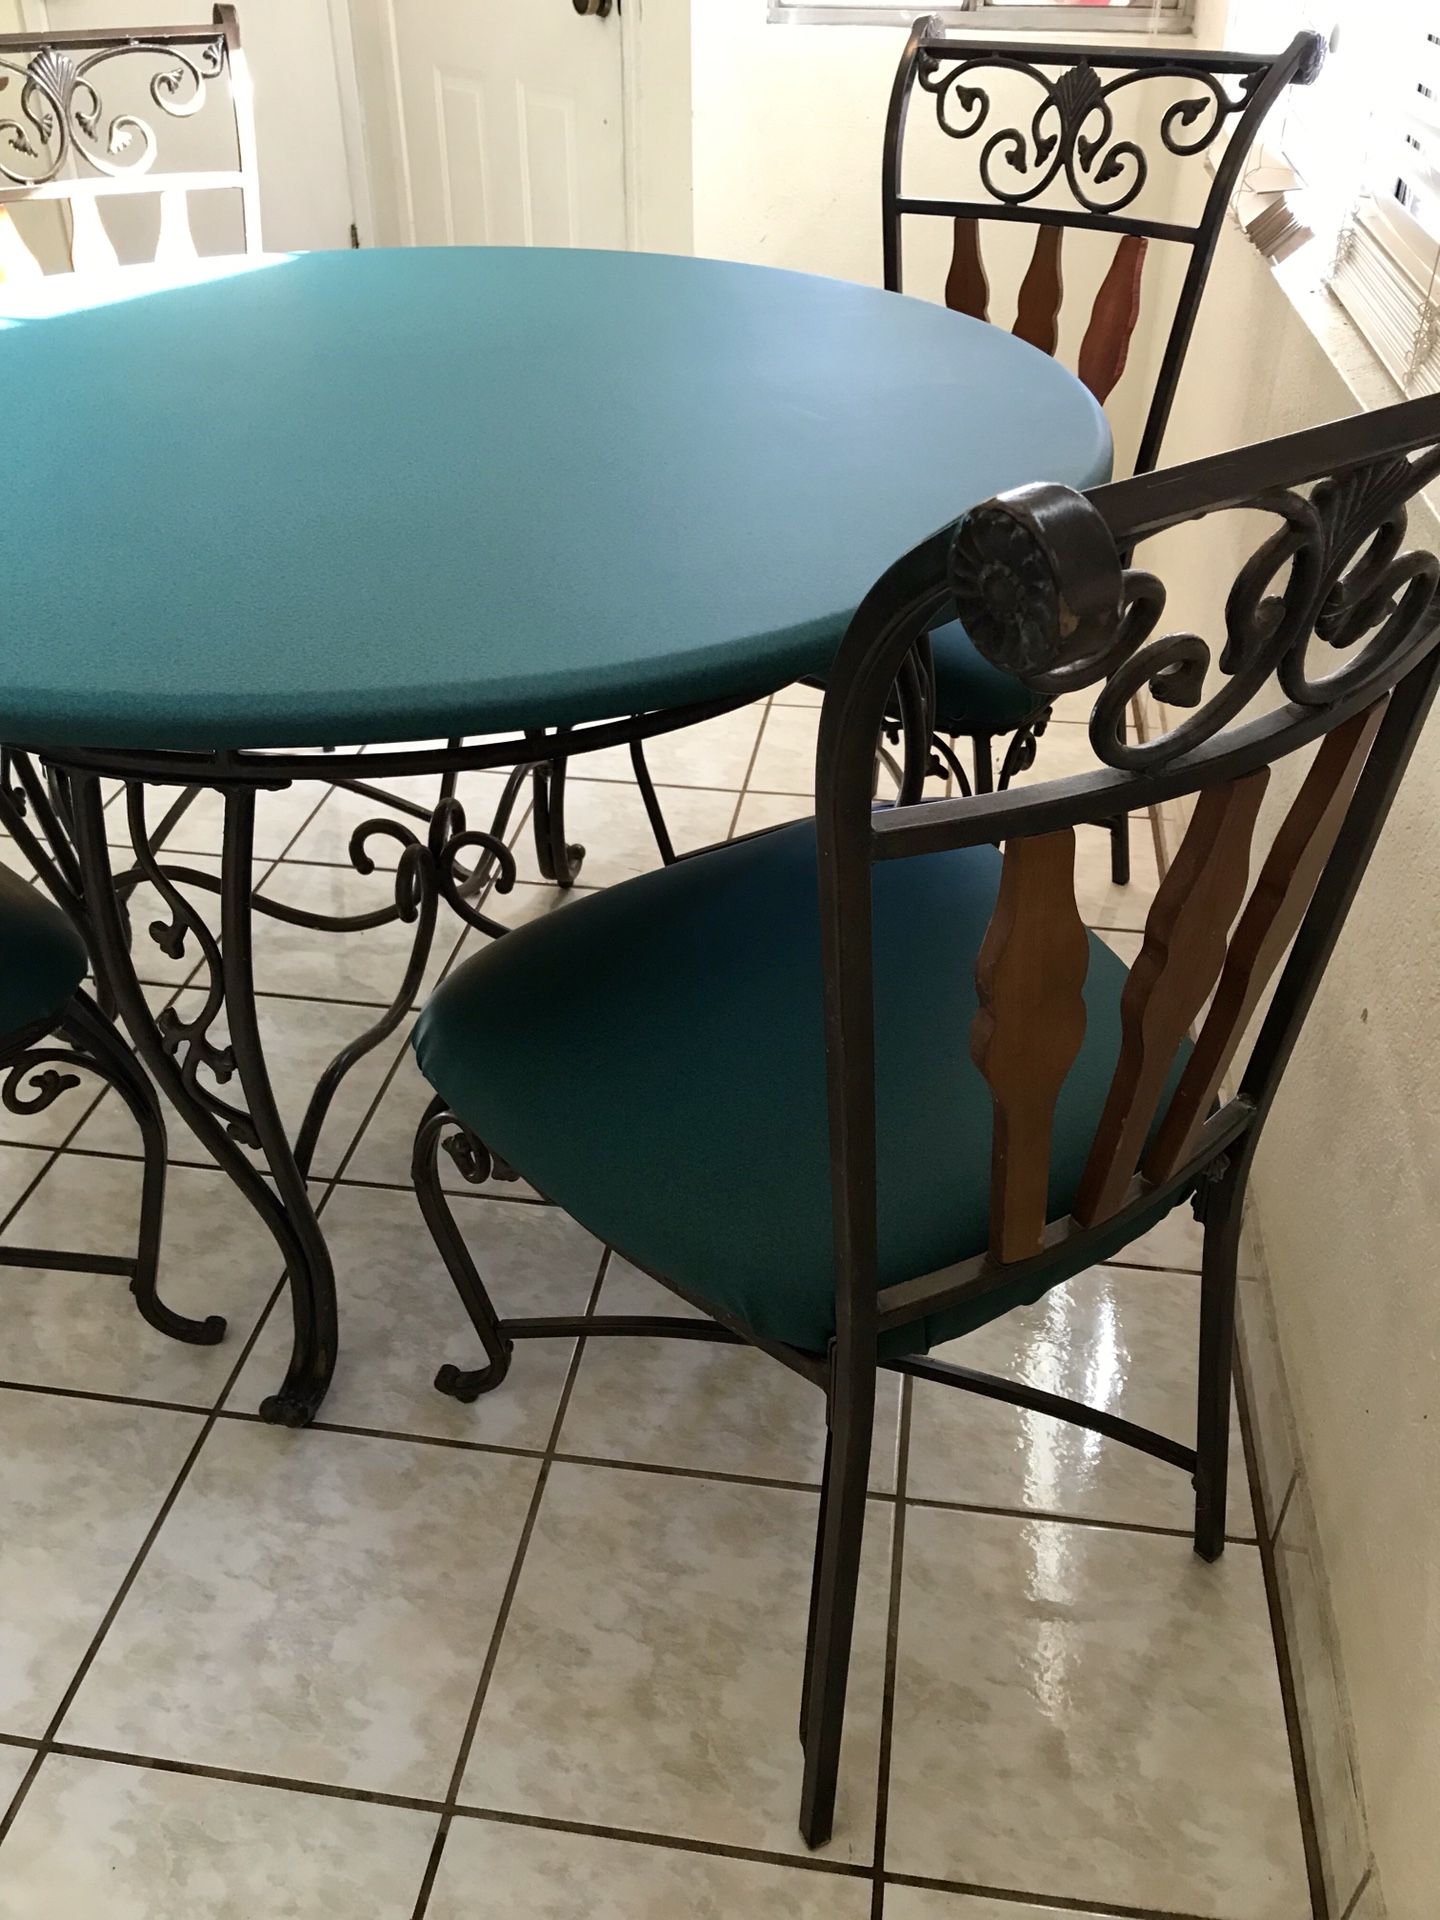 Amazing Patio Furniture 5 piece Table and chairs